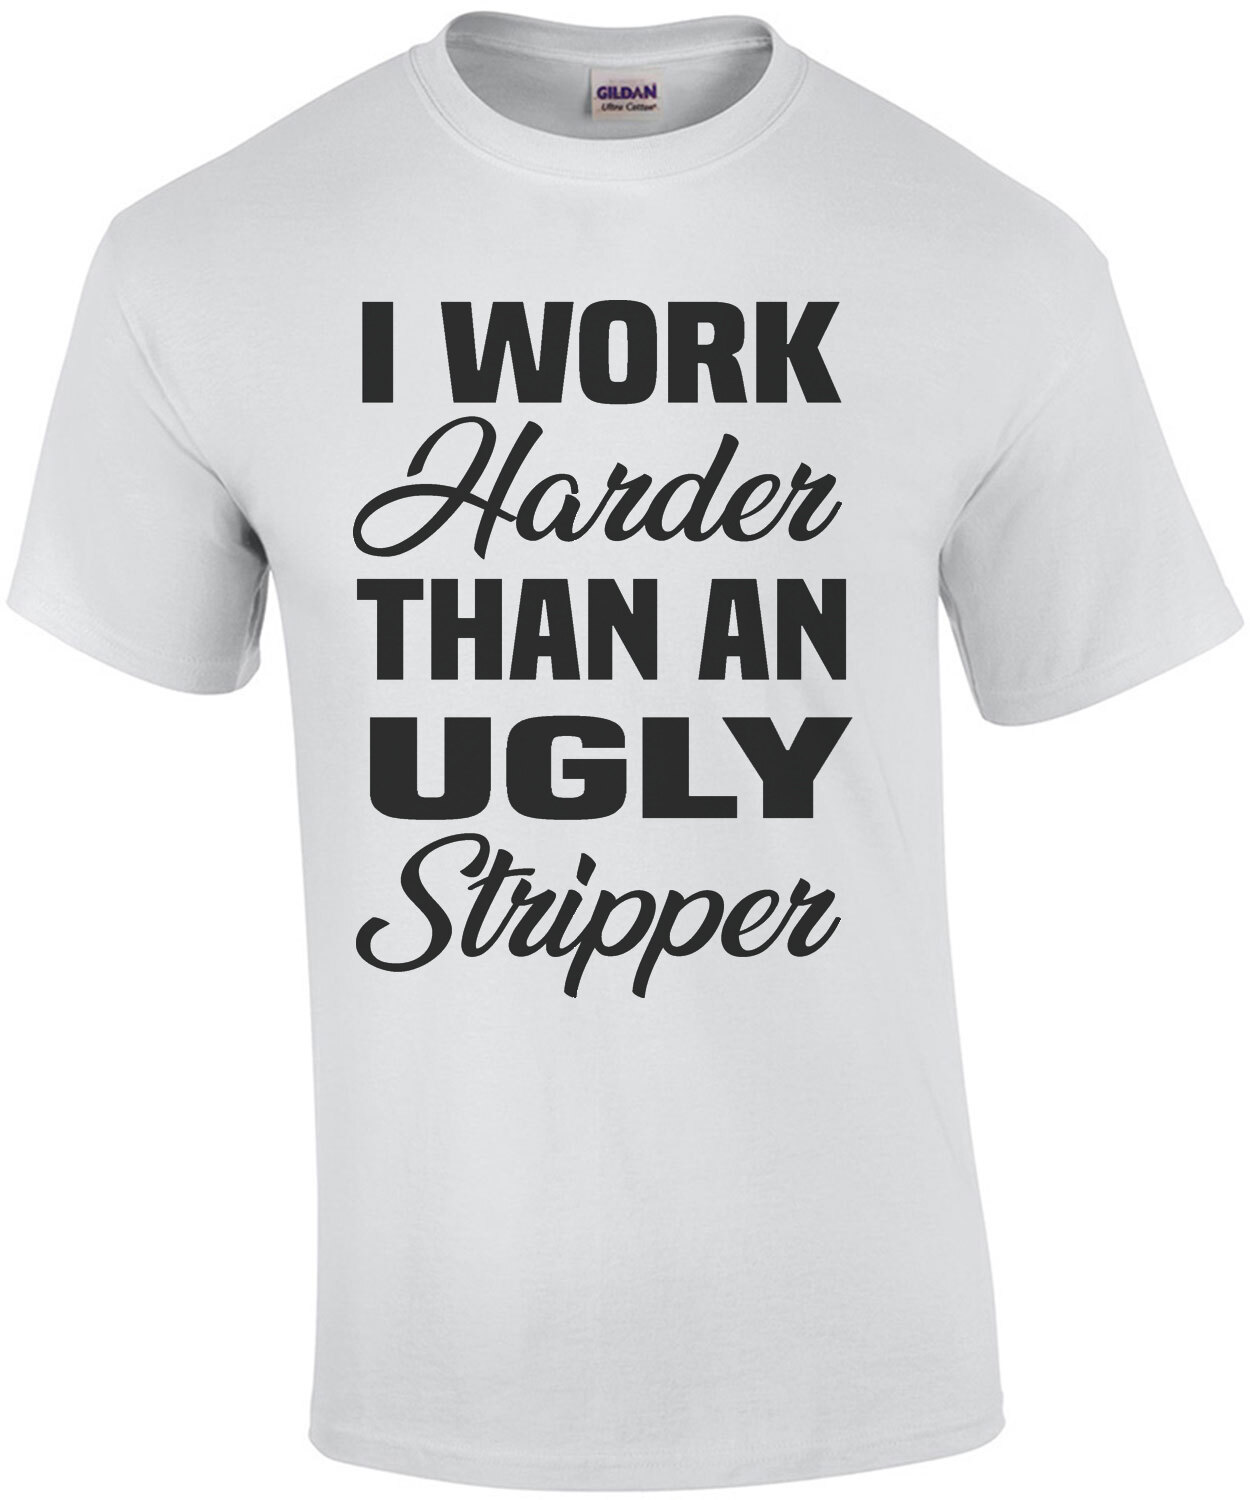 T1028 Work Harder Funny Offensive Rude Tees Unisex T-Shirt